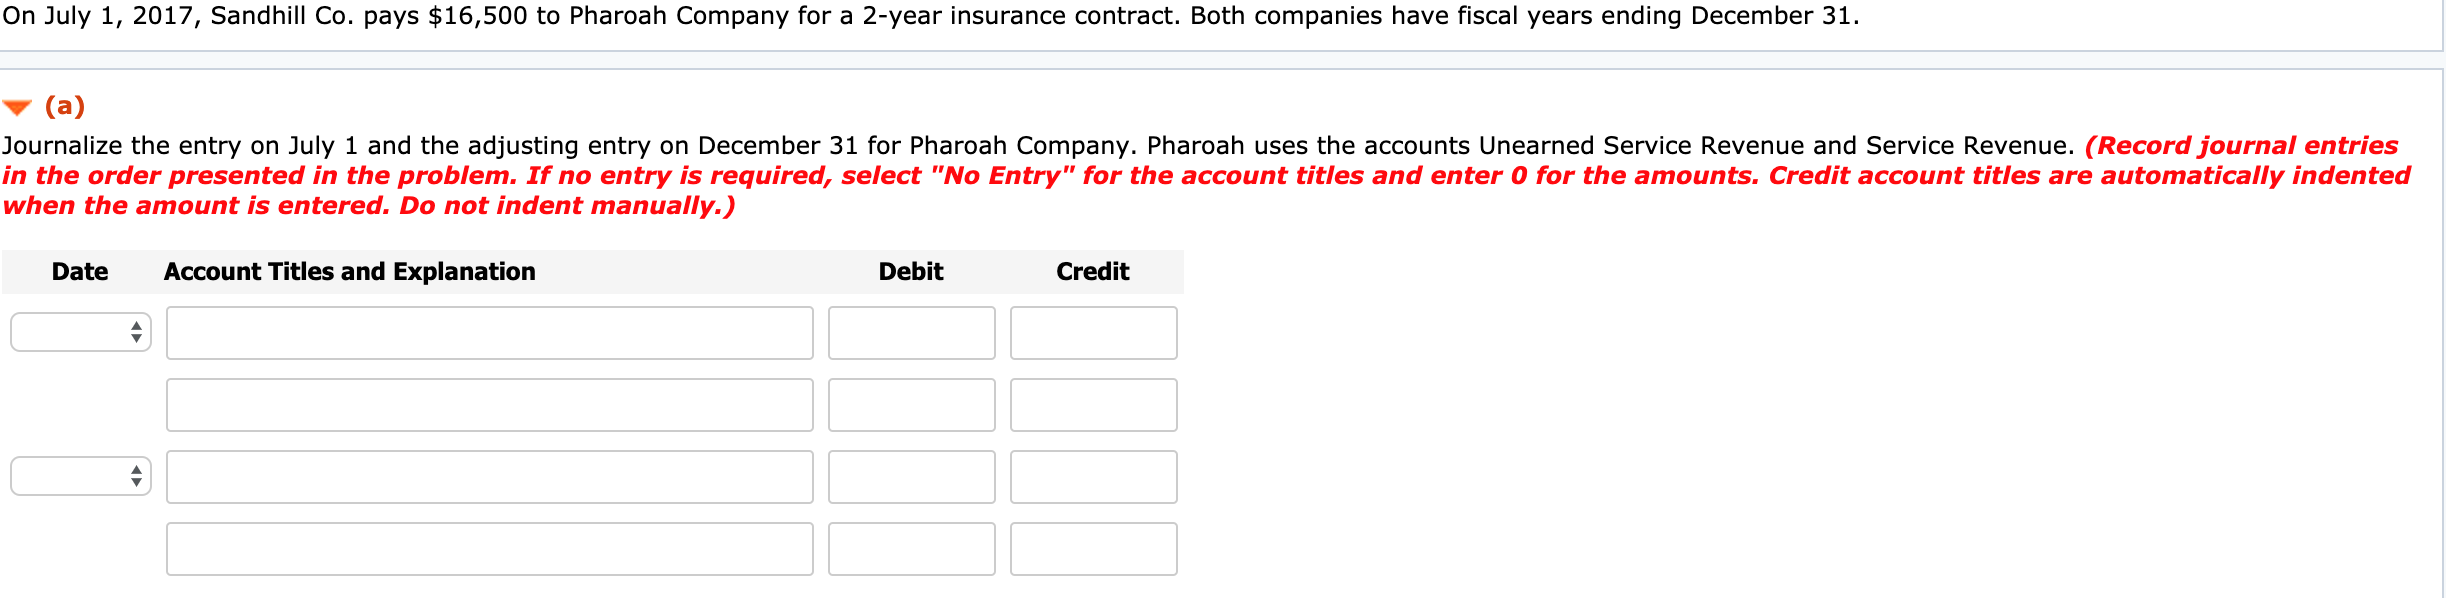 On July 1, 2017, Sandhill Co. pays $16,500 to Pharoah Company for a 2-year insurance contract. Both companies have fiscal years ending December 31.
(a)
Journalize the entry on July 1 and the adjusting entry on December 31 for Pharoah Company. Pharoah uses the accounts Unearned Service Revenue and Service Revenue. (Record journal entries
in the order presented in the problem. If no entry is required, select "No Entry" for the account titles and enter 0 for the amounts. Credit account titles are automatically indented
when the amount is entered. Do not indent manually.)
Date
Account Titles and Explanation
Debit
Credit
